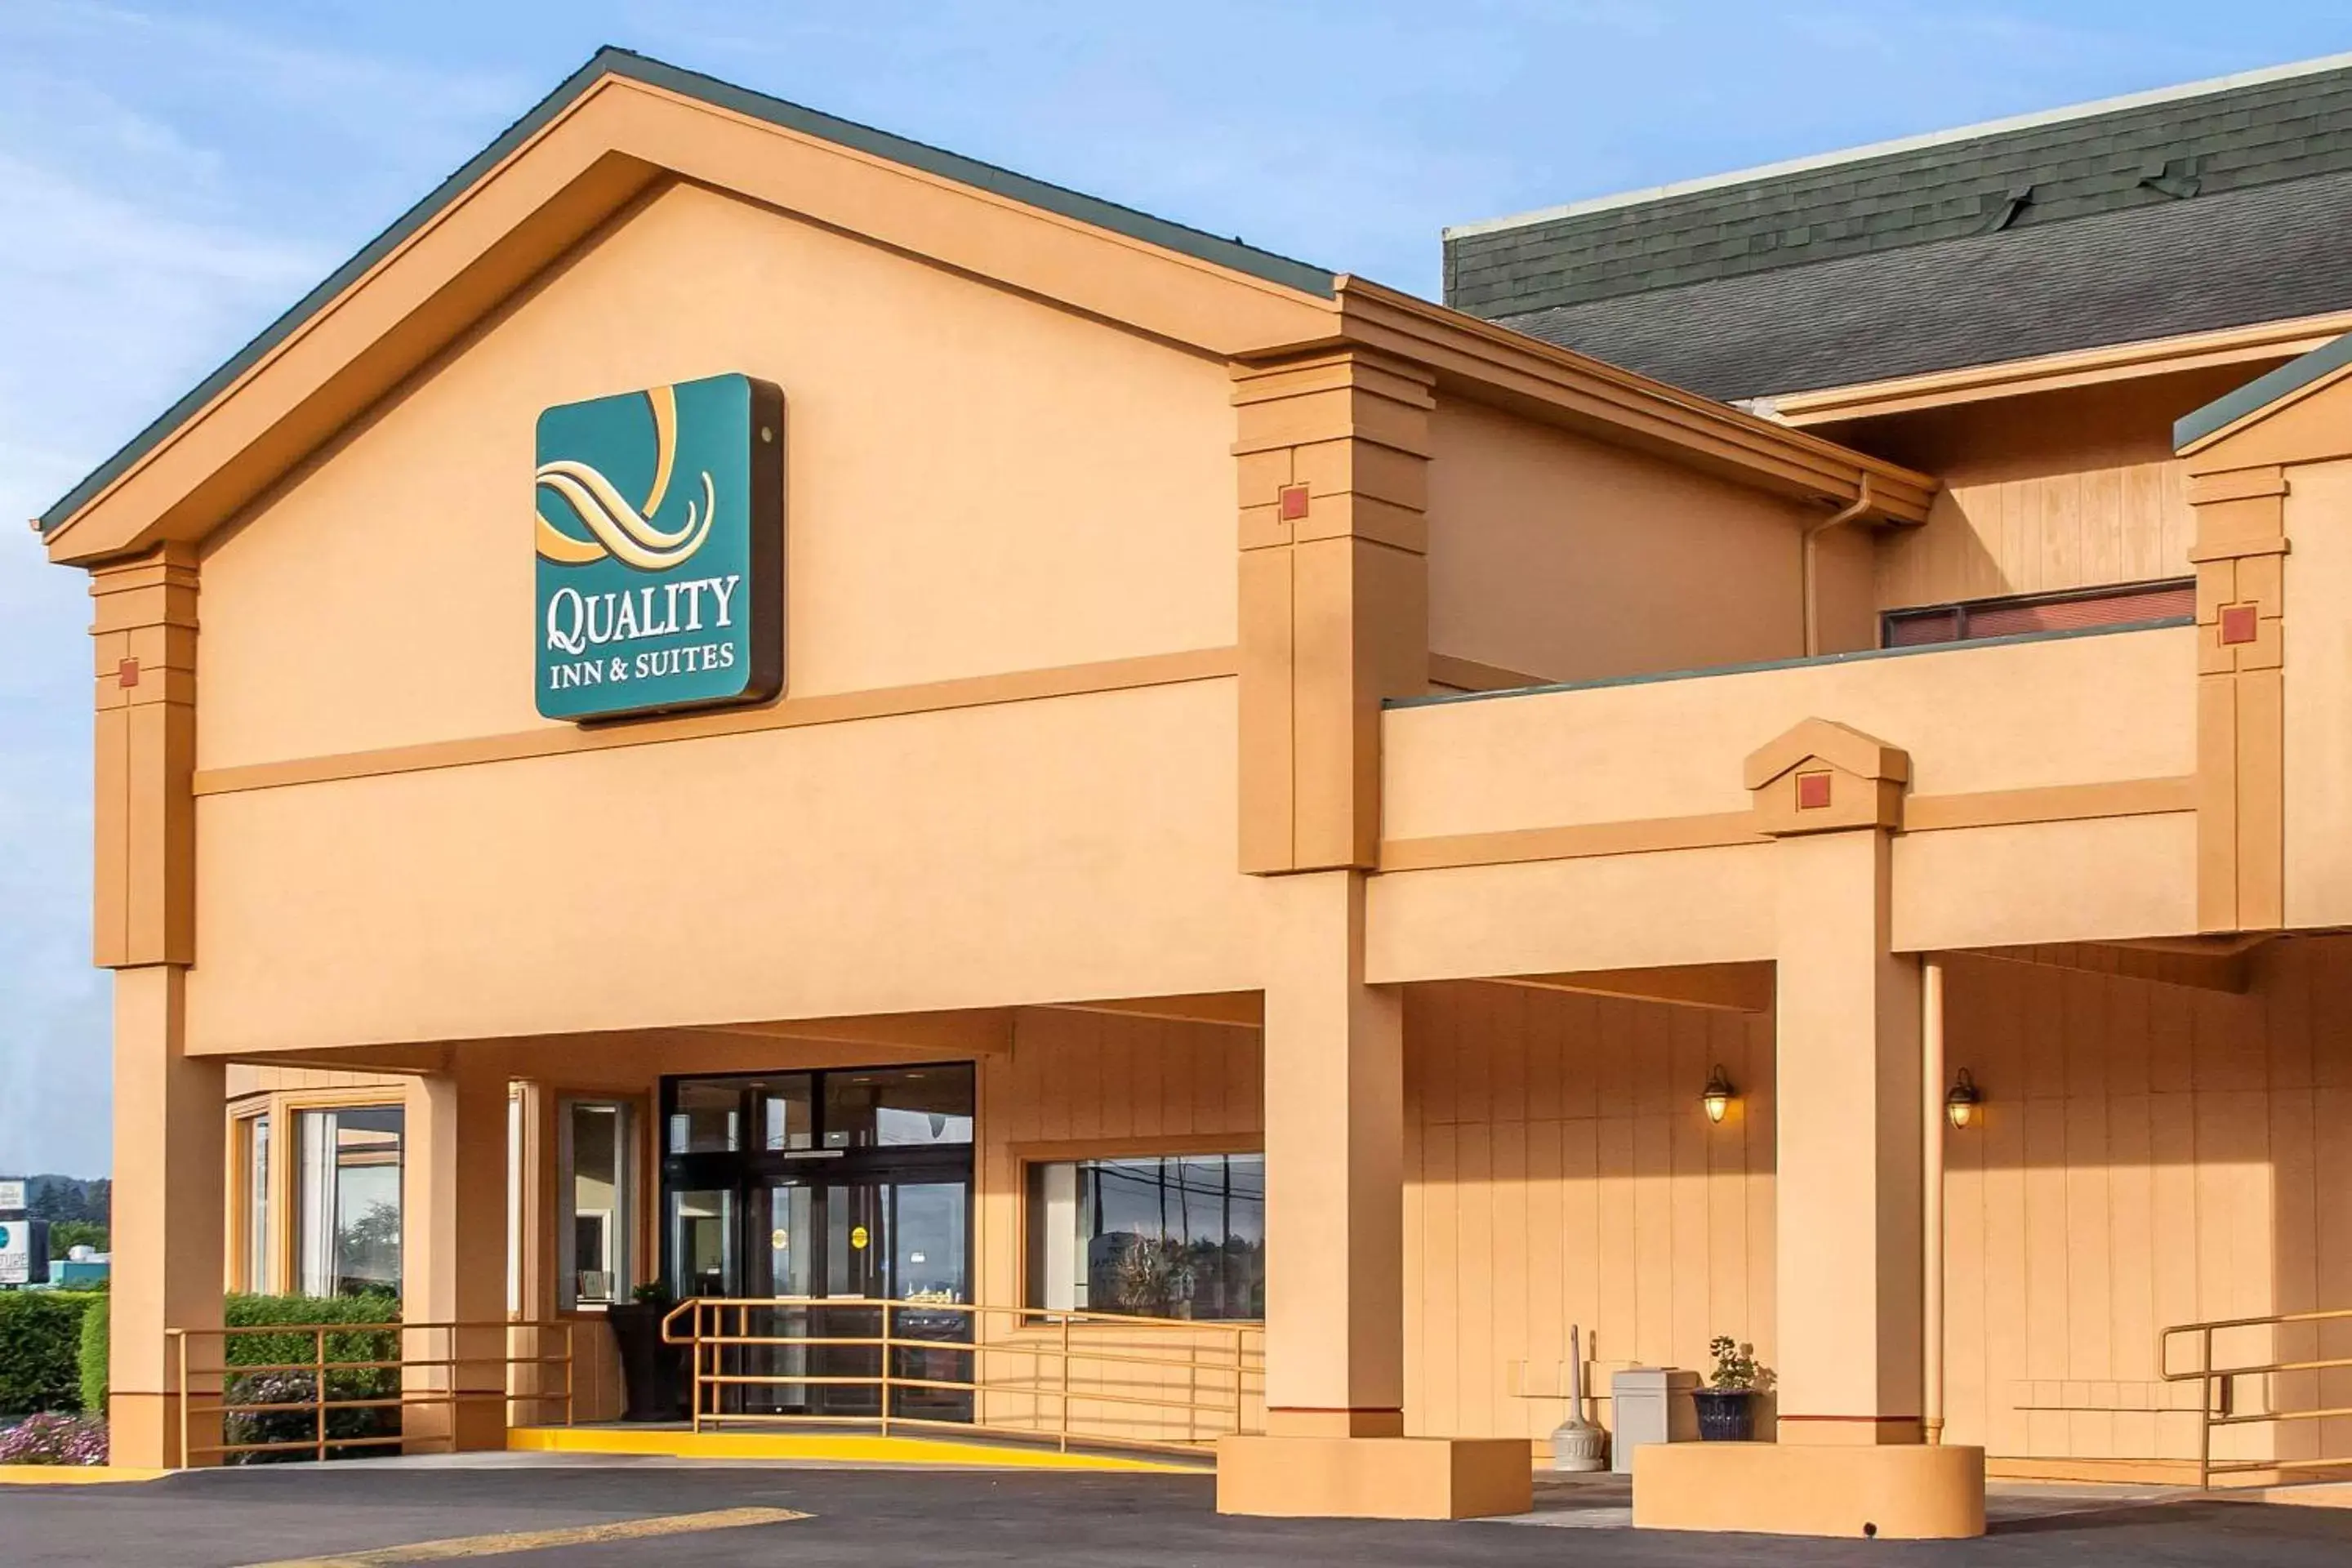 Property Building in Quality Inn & Suites at Coos Bay